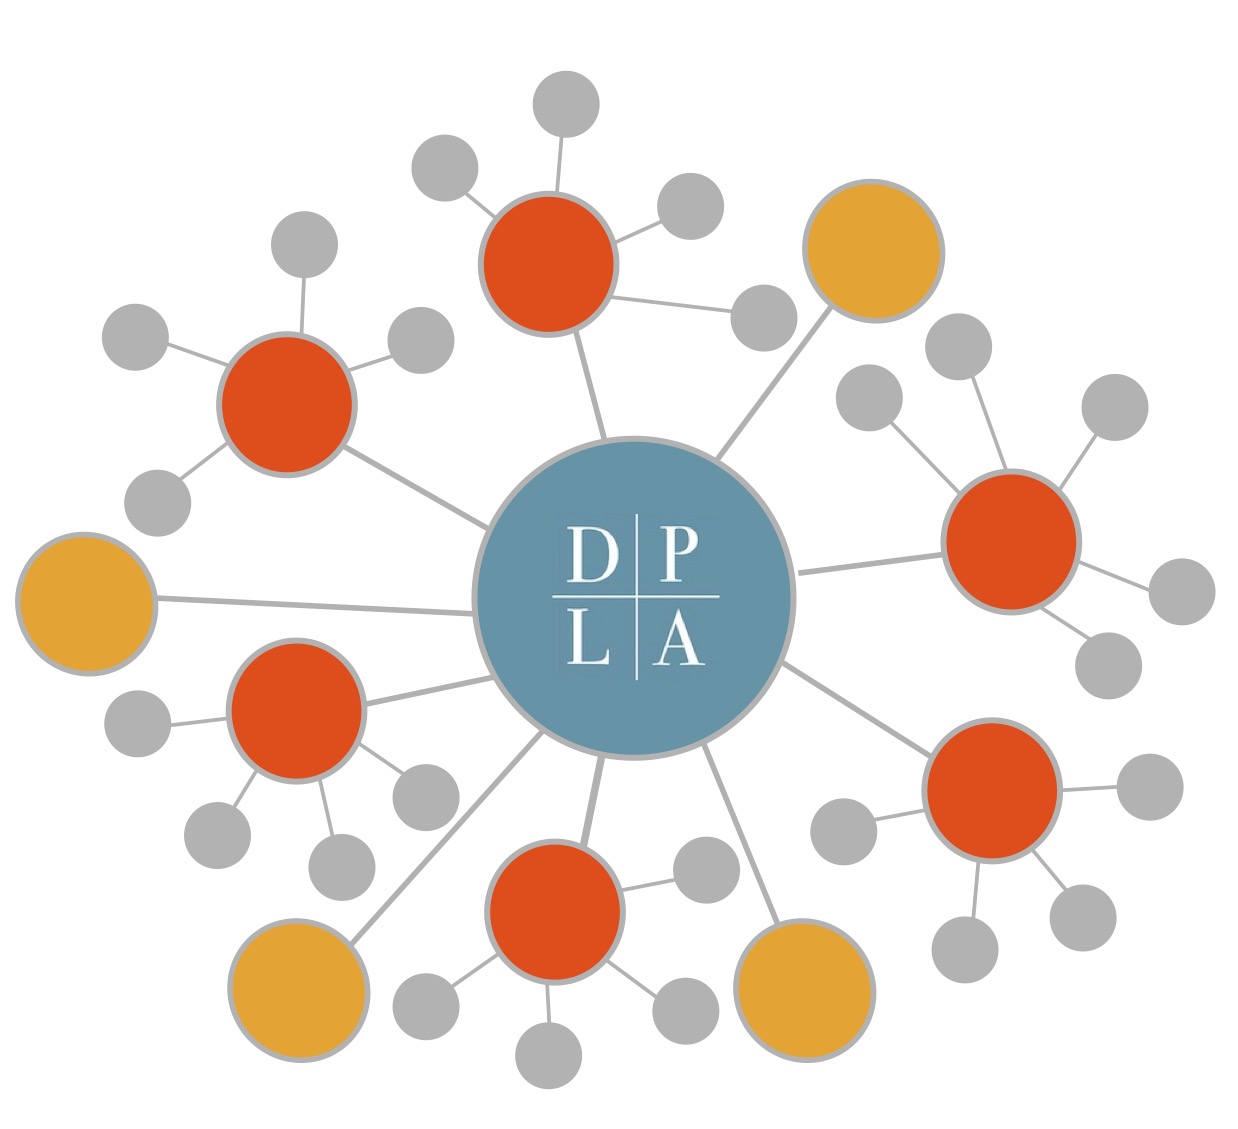 Iconographic representation of the DPLA network, with DPLA as the central node and circles attached to it representing the DPLA hubs